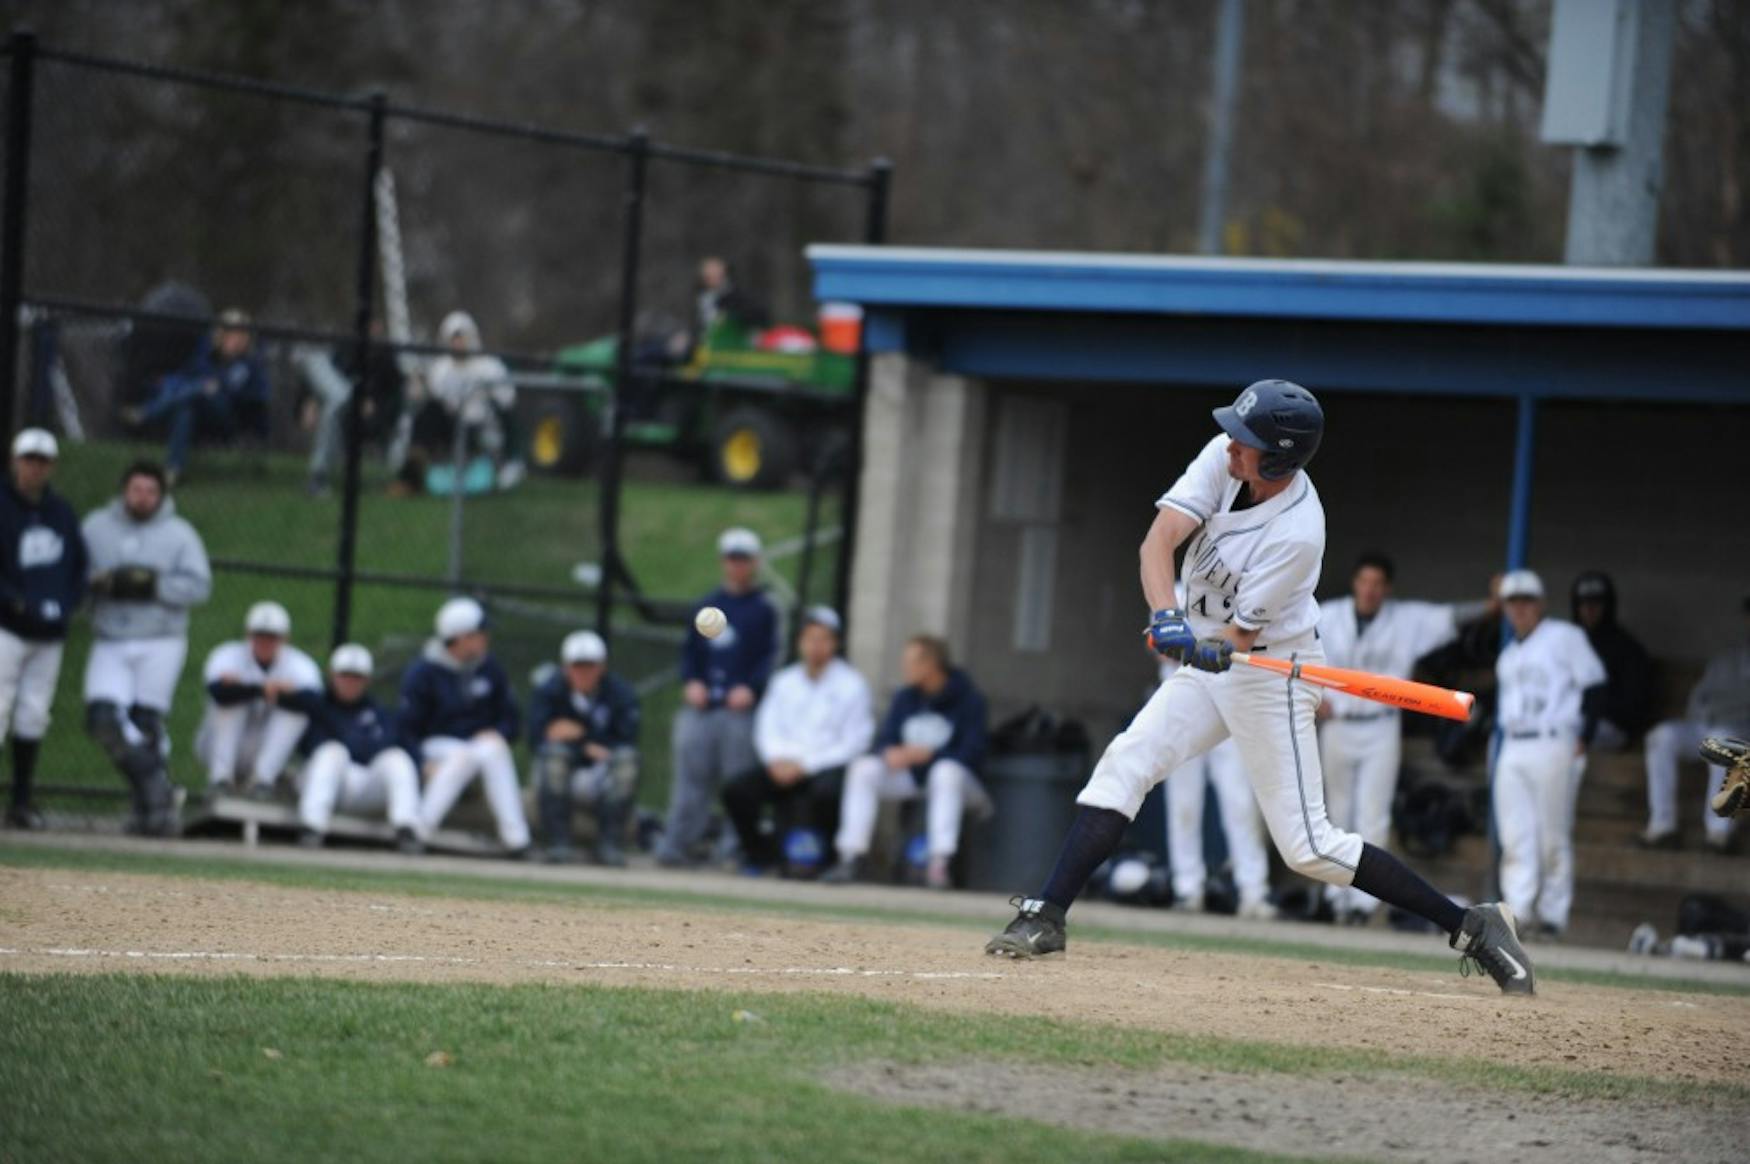 SEARCHING FOR THE HIT: Outfielder Ryan Healy ’16 takes a turn at bat for the Judges against Trinity College on Sunday afternoon.